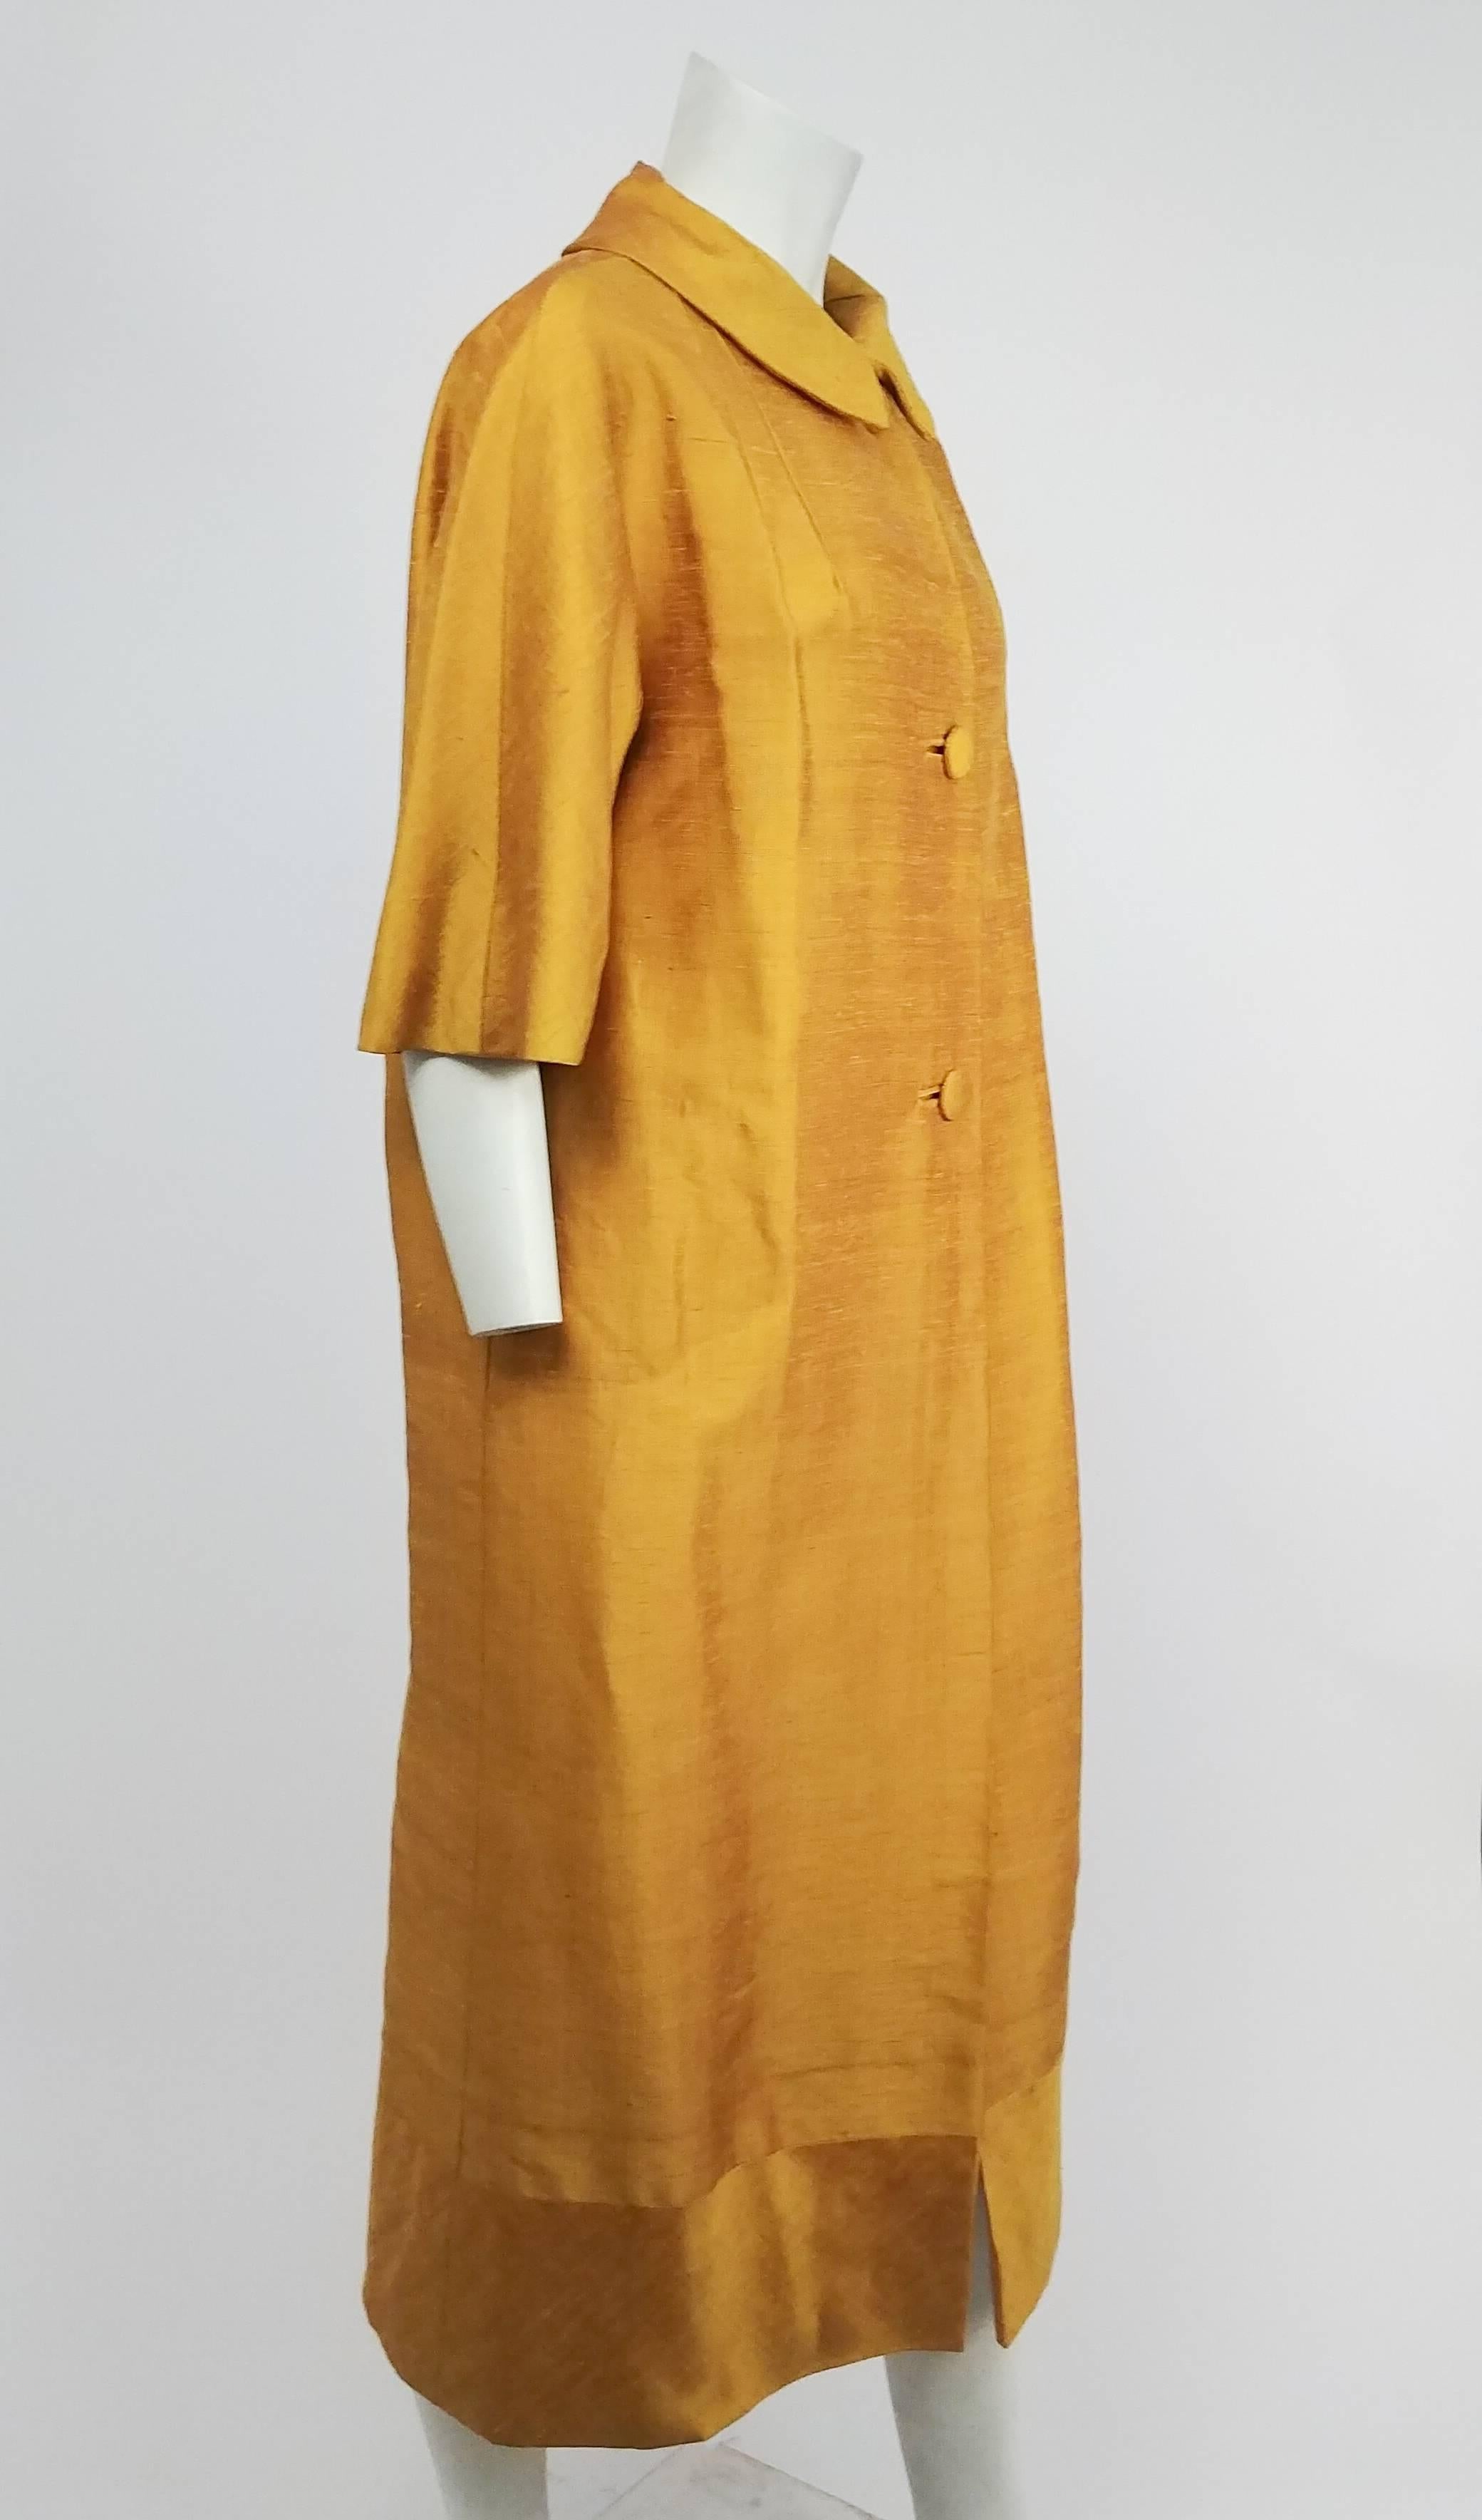 1960s Saffron Yellow Silk Shantung Opera Coat. Buttons up front. Glove length sleeves. Contrast band at bottom with fabric sewn on the bias, creating juxtaposition when light hits the textured fabric.  